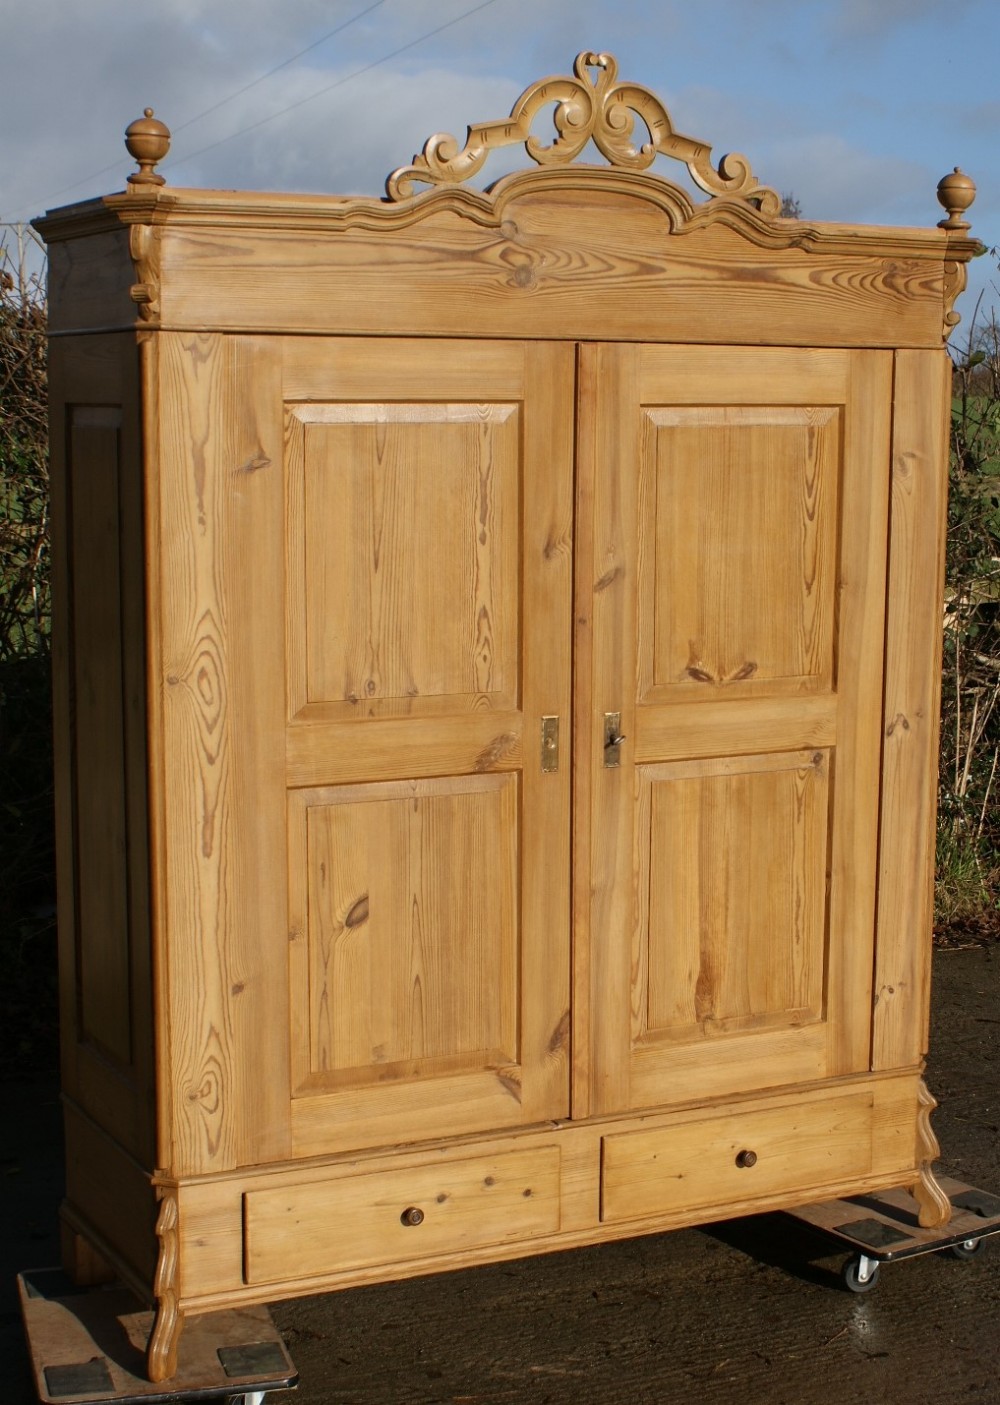 19th century large antique german solid pine armoire wardrobe